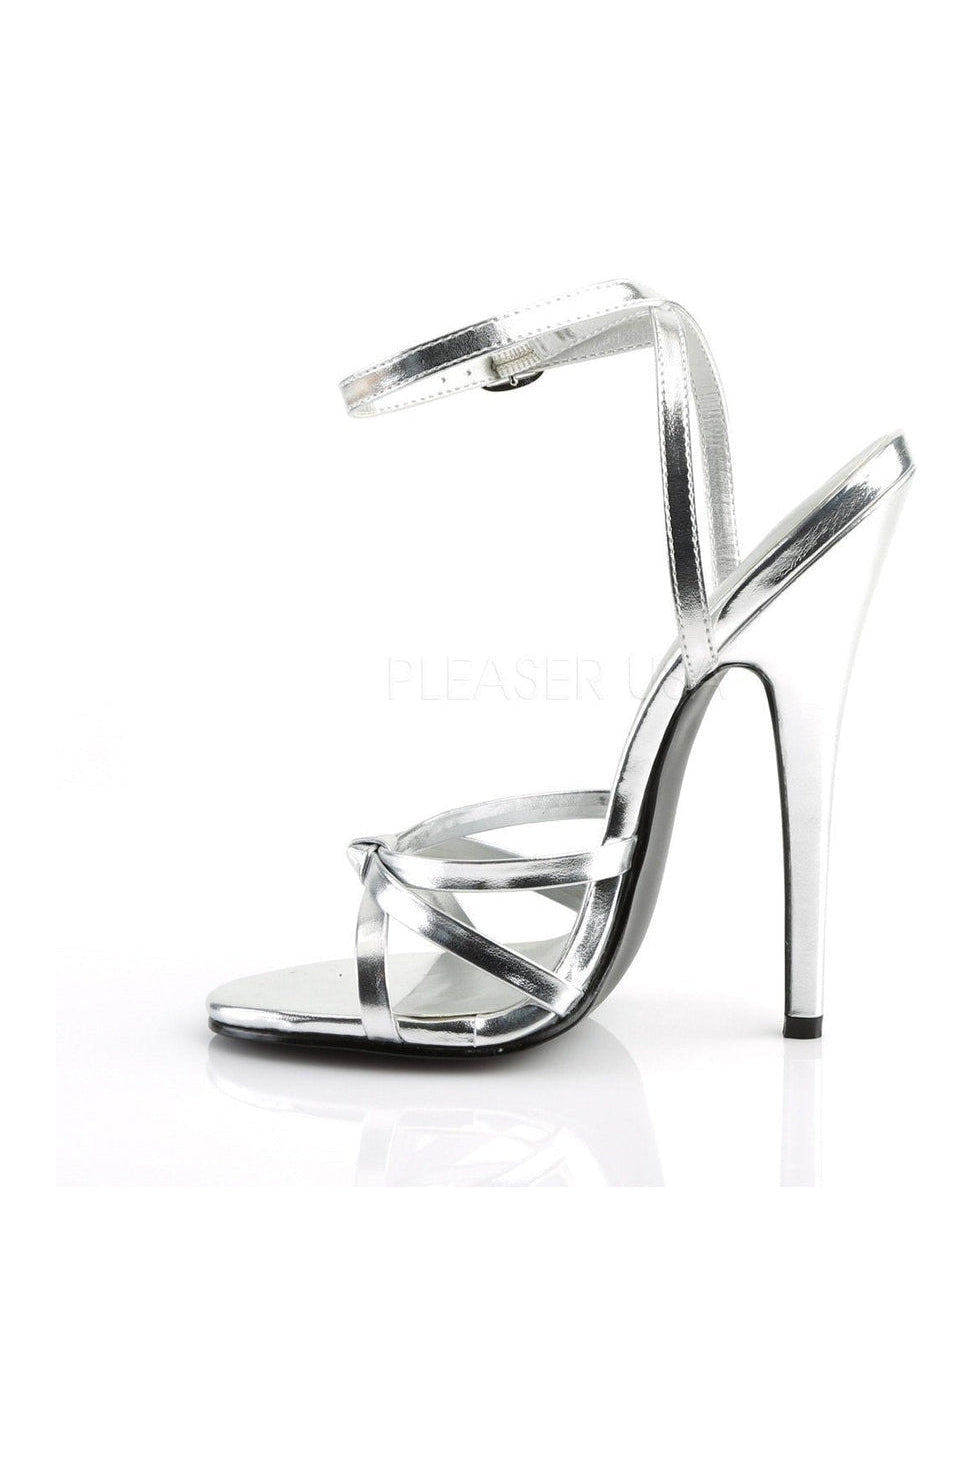 DOMINA-108 Sandal | Silver Faux Leather-Sandals- Stripper Shoes at SEXYSHOES.COM